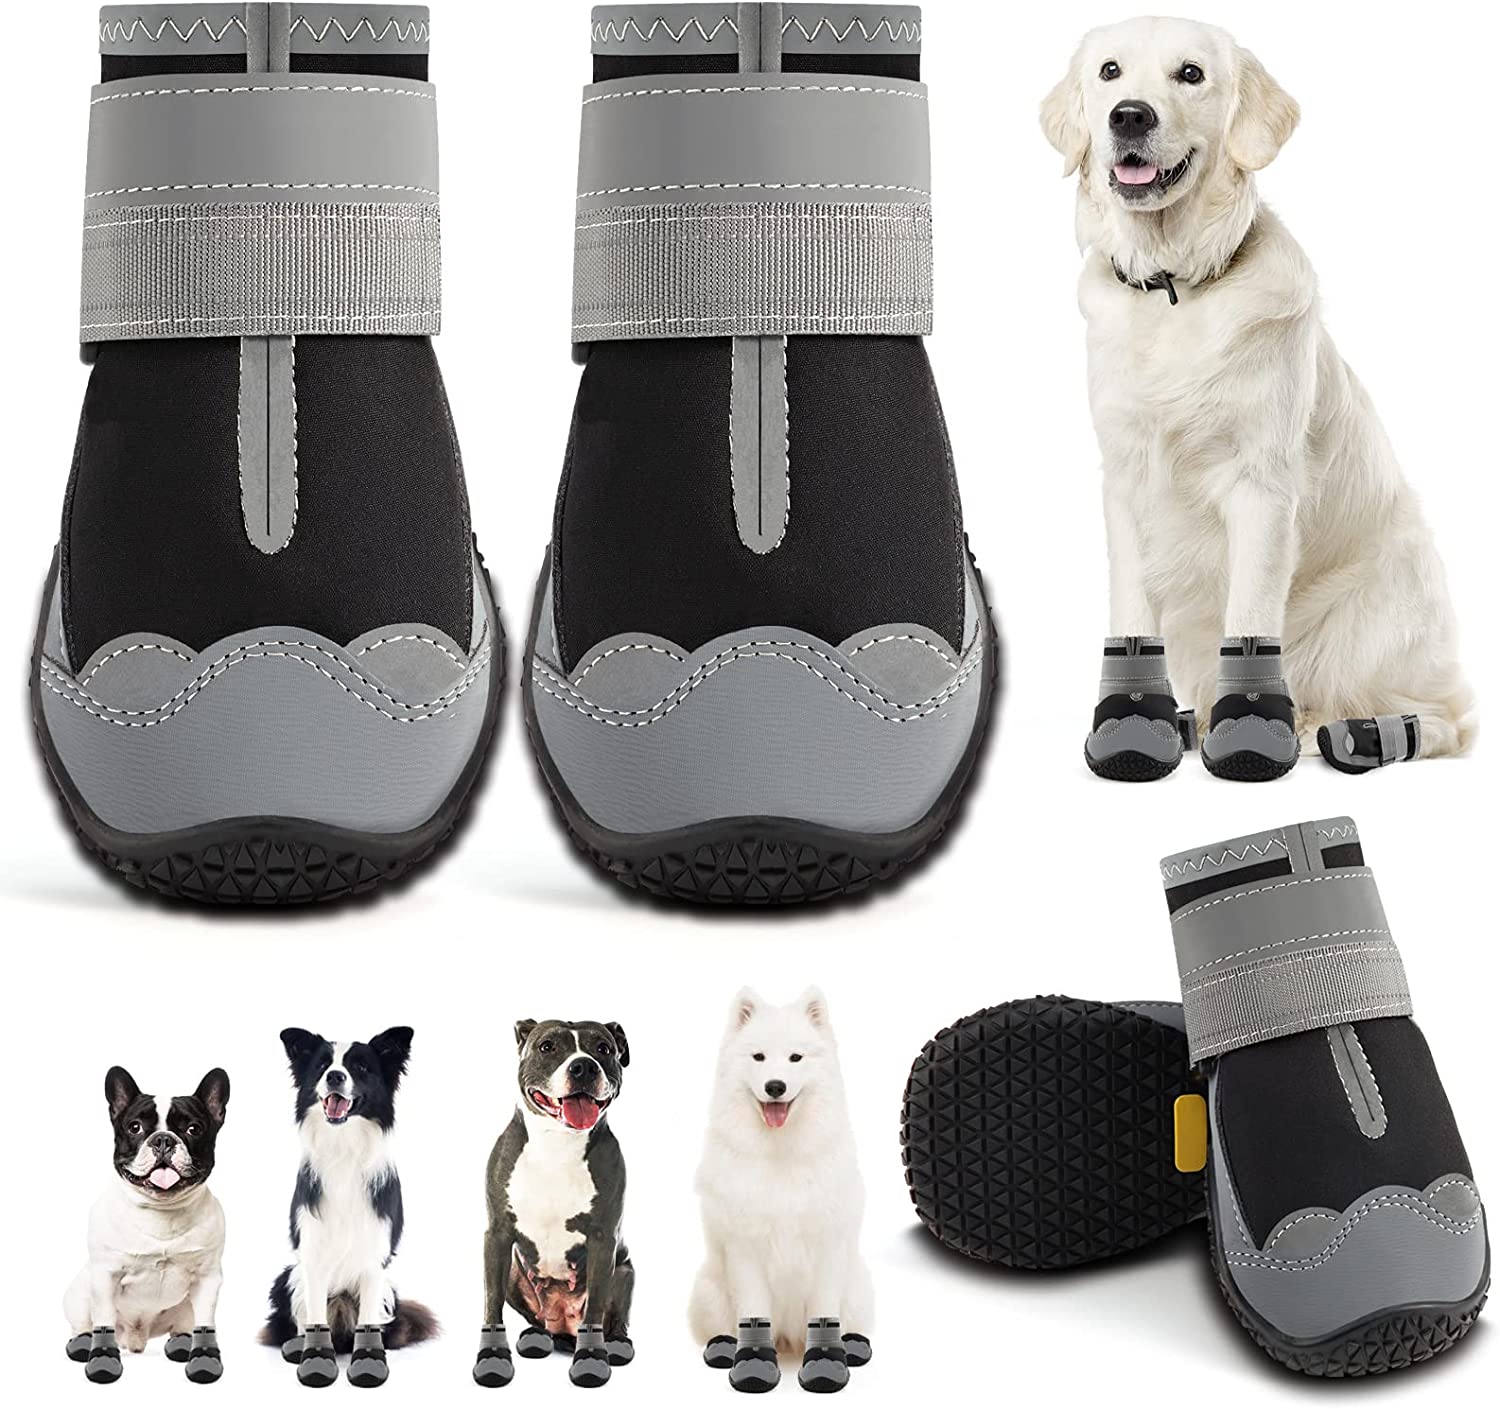 Jzxoiva Dog Shoes for Large Dogs Boots